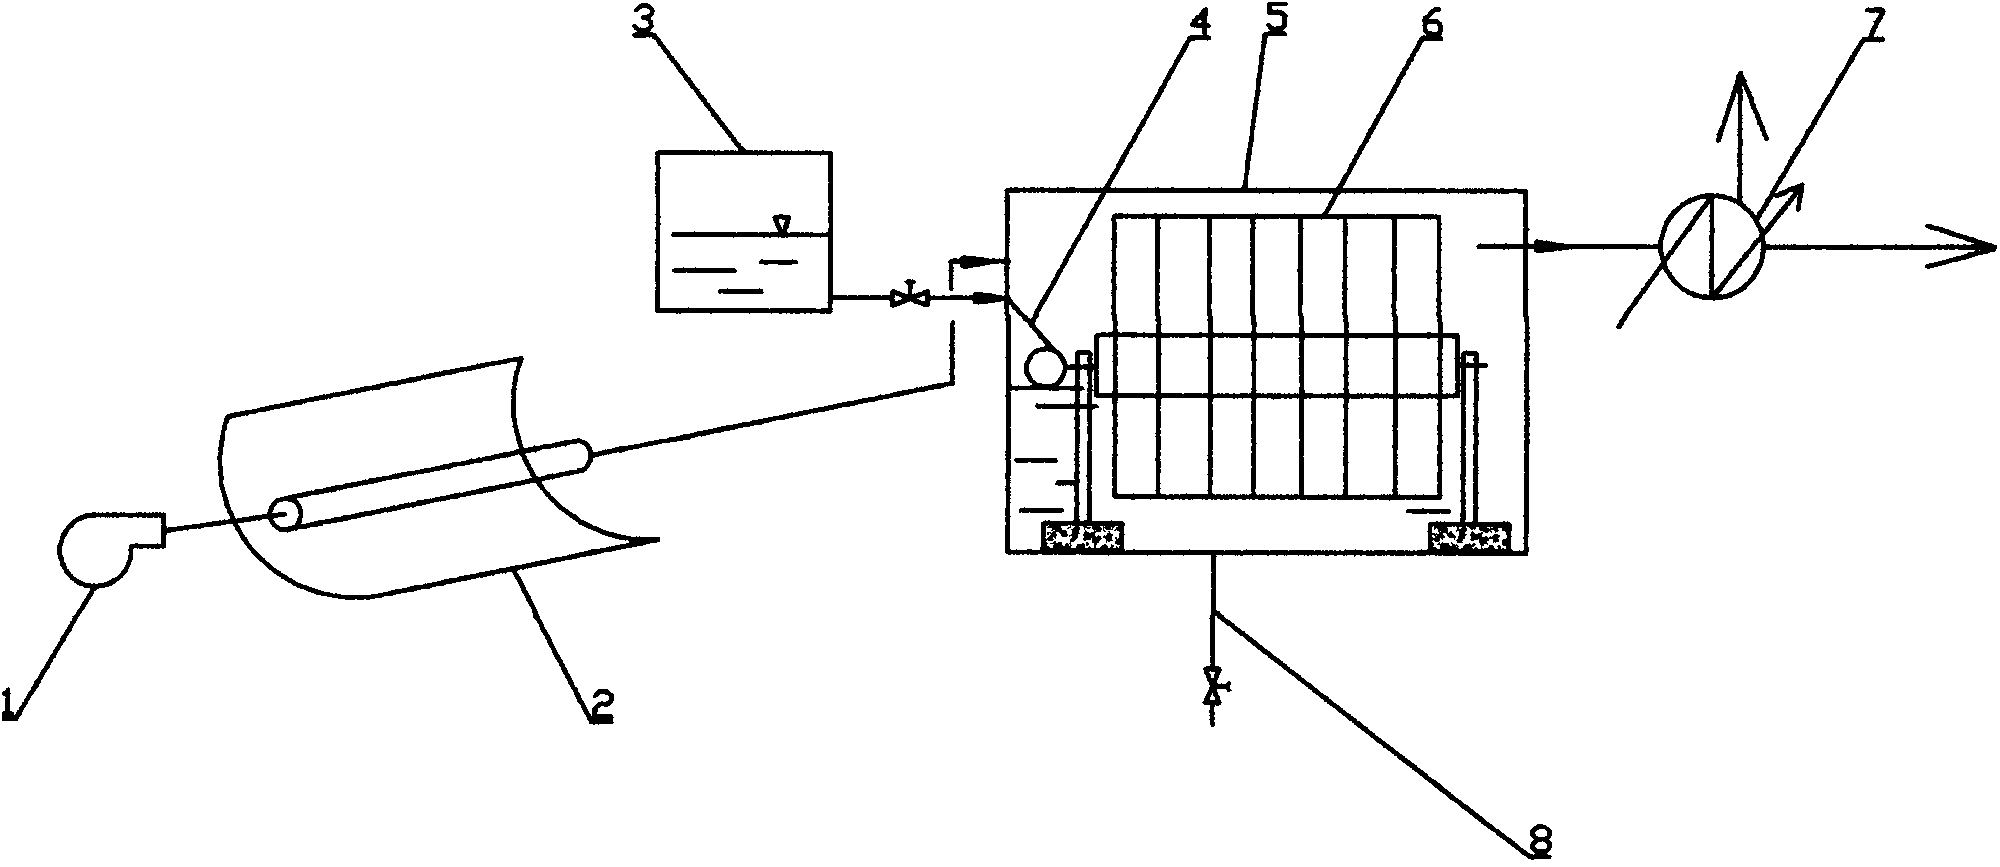 Solar seawater concentration desalting device and method